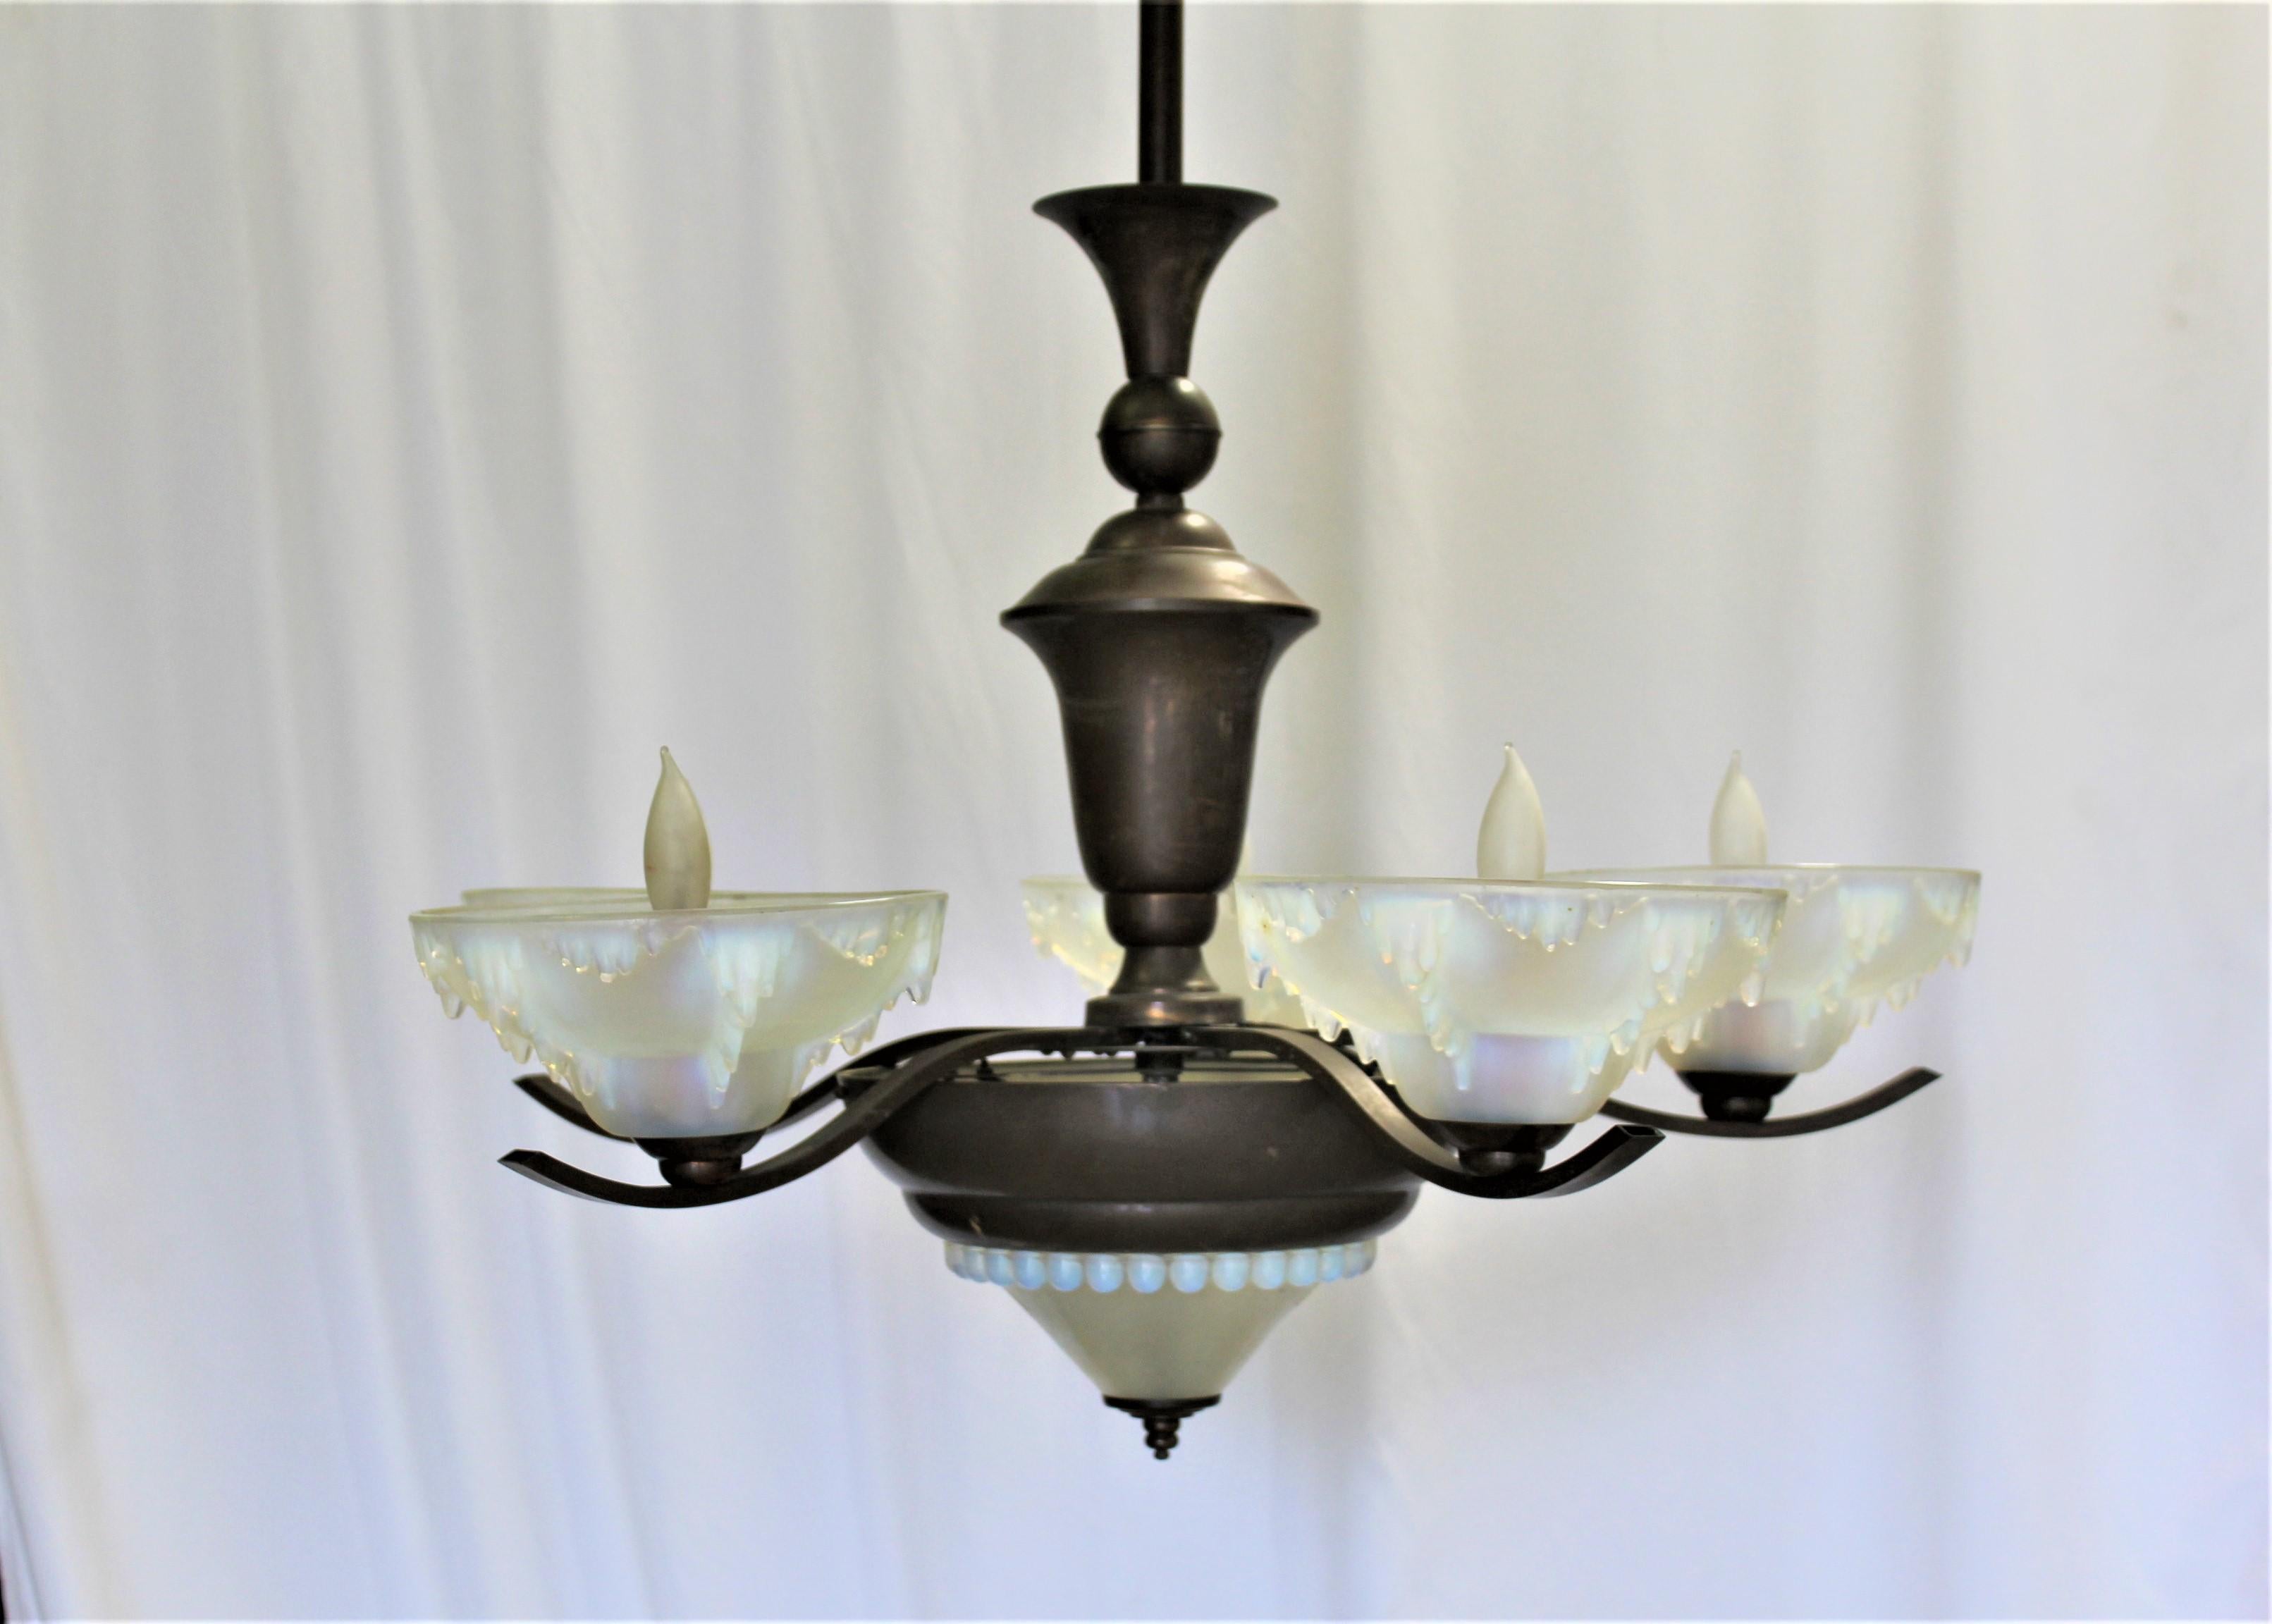 A real Art Deco chandelier from France. Has 5 arms with Vaseline glass shades .The bottom center glass is designed with balls around and in Vaseline glass . The main body and arms are finished in a Bronze /Copper color. The other glass shades are